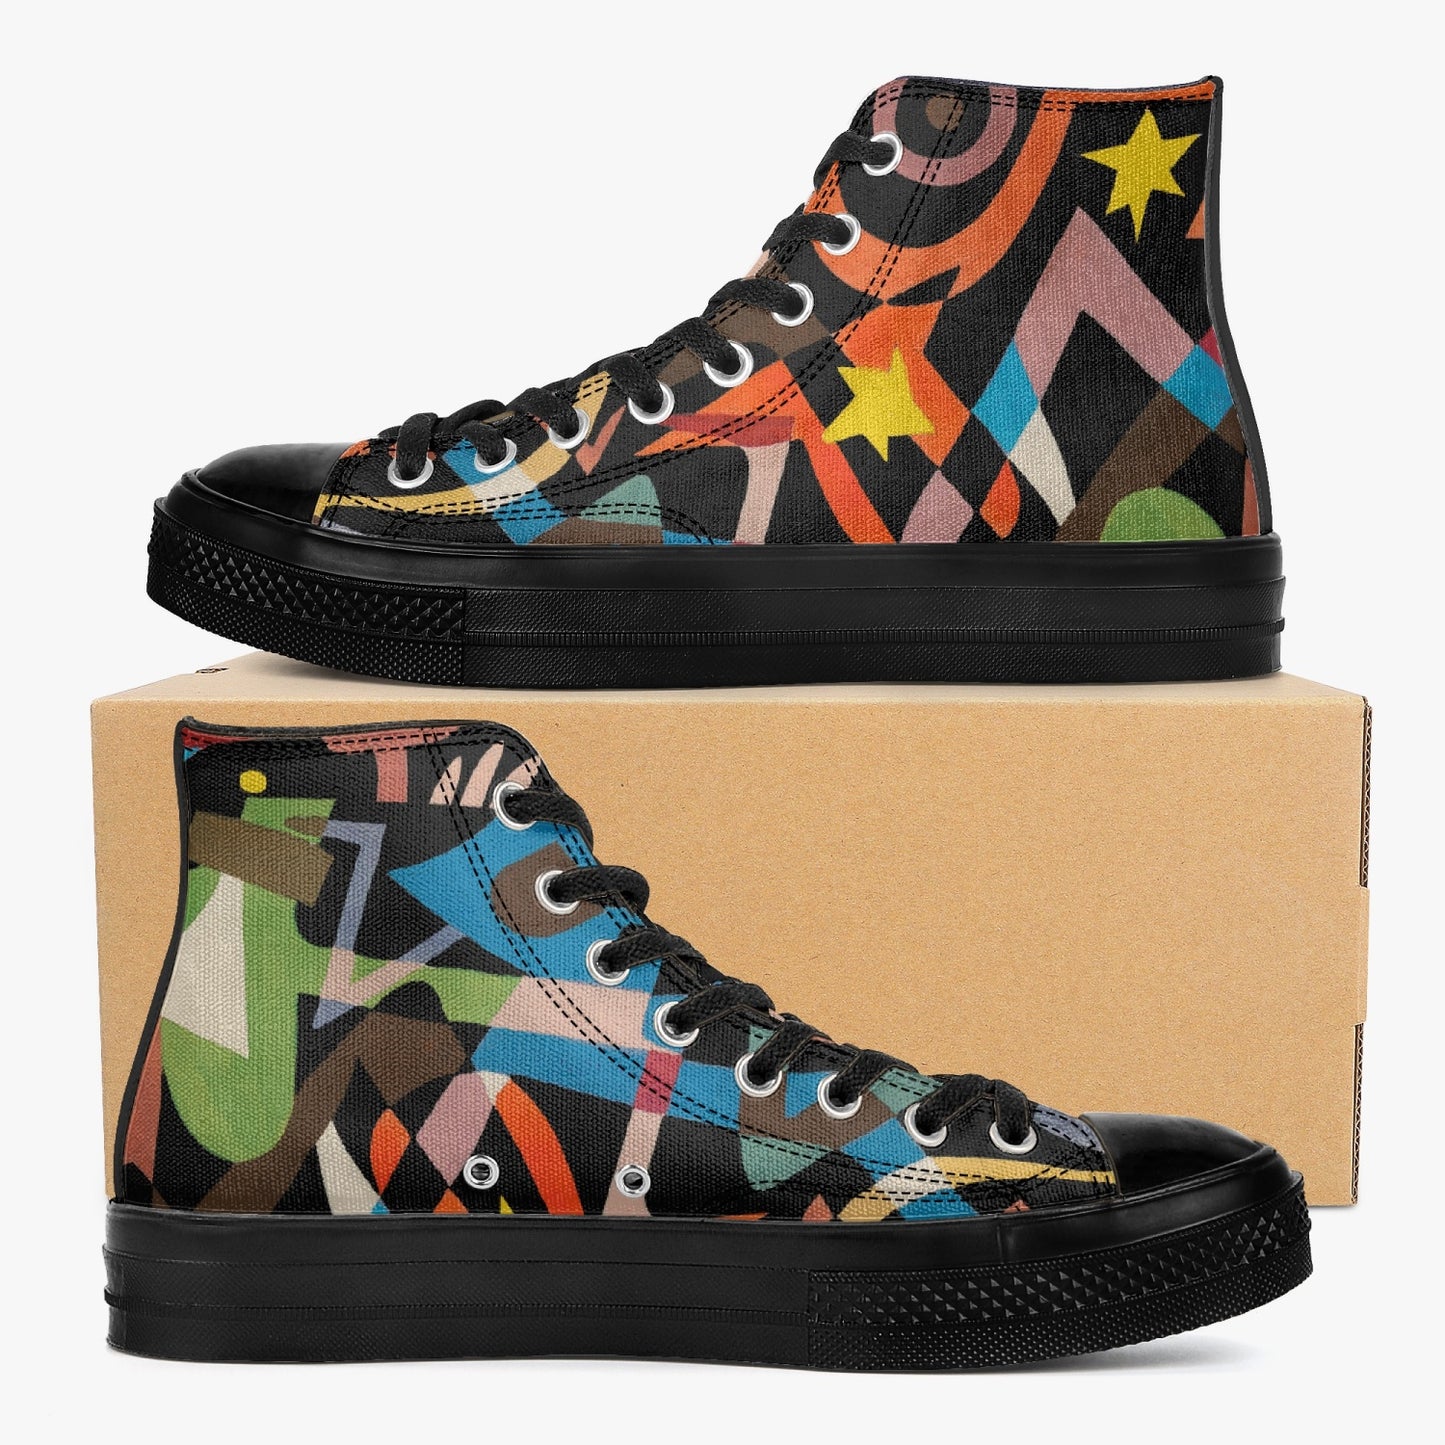 286. New High-Top Canvas Shoes - Black